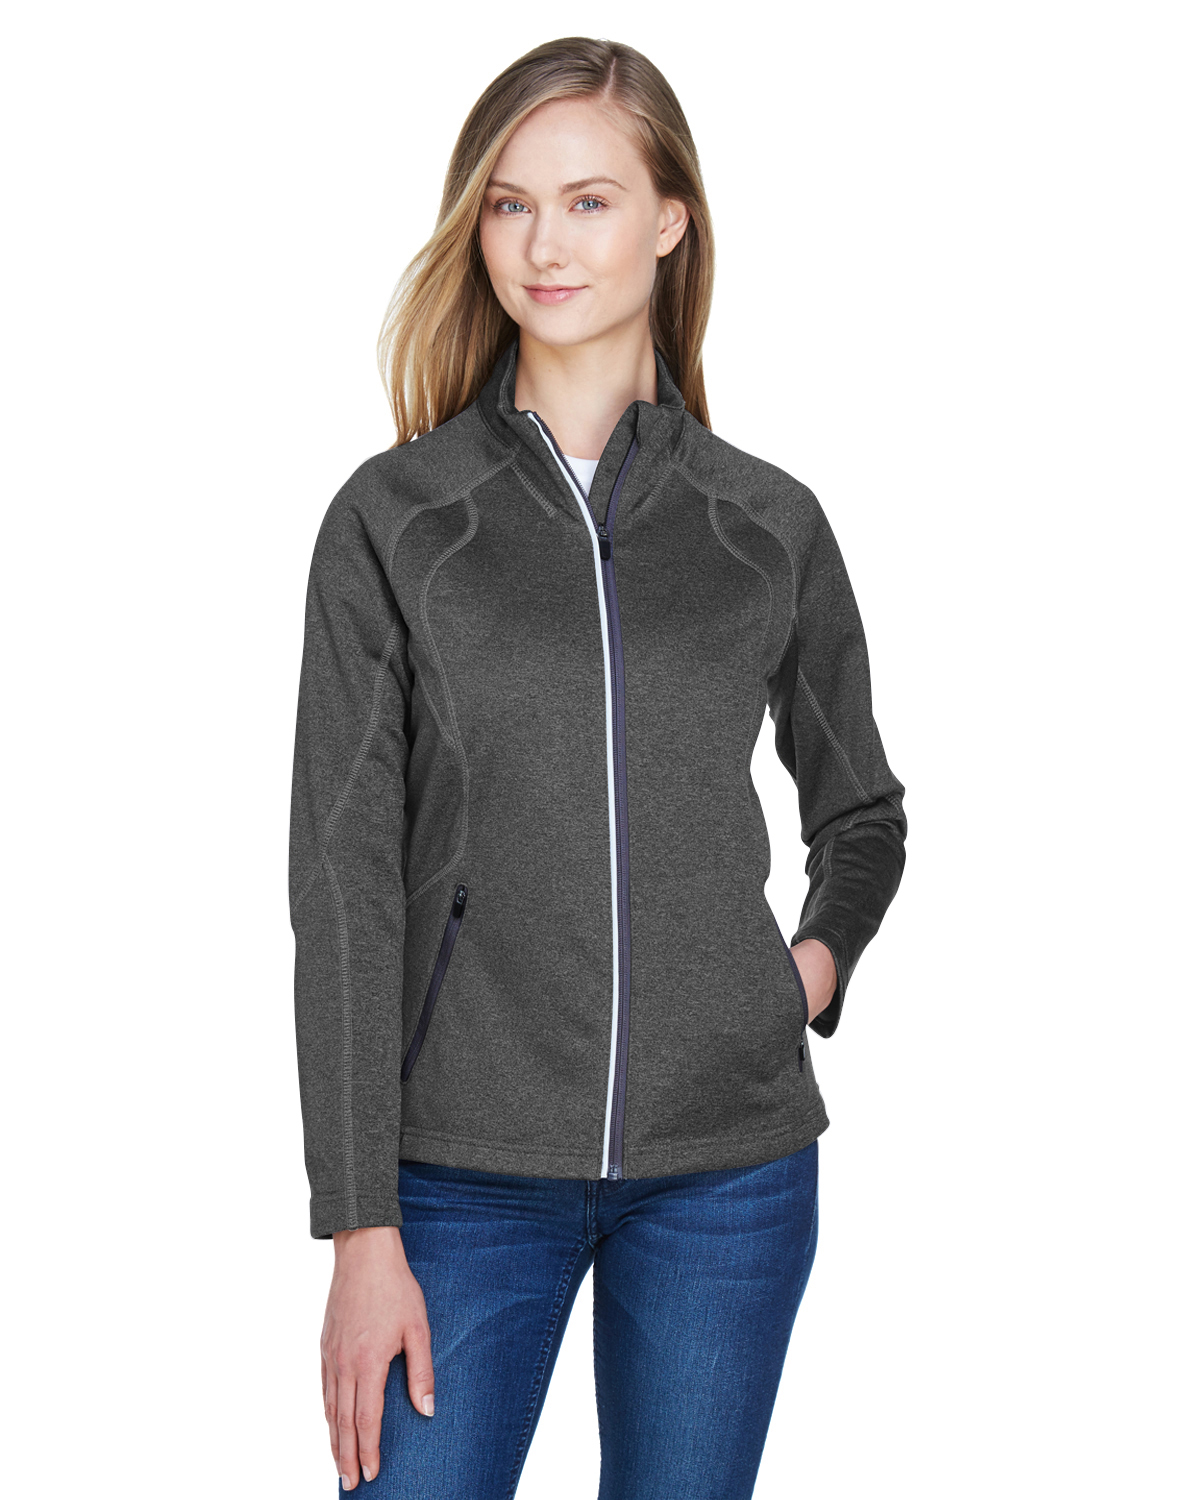 The Ash City - North End Ladies' Gravity Performance Fleece Jacket - CARBN HEATH 452 - XS - image 1 of 2